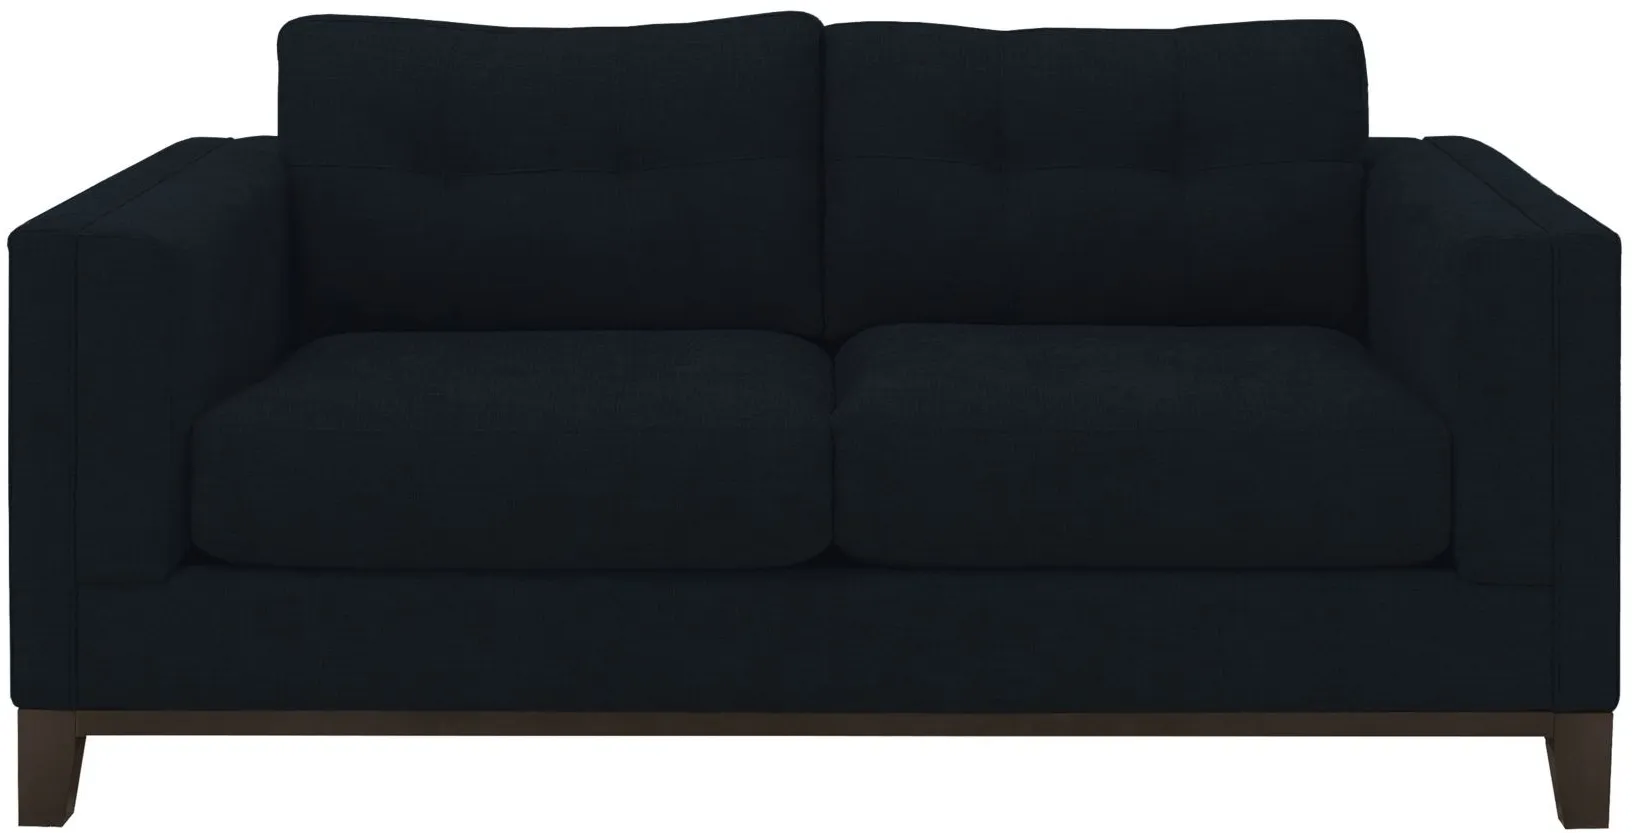 Mirasol Loveseat in Suede so Soft- Slate by H.M. Richards